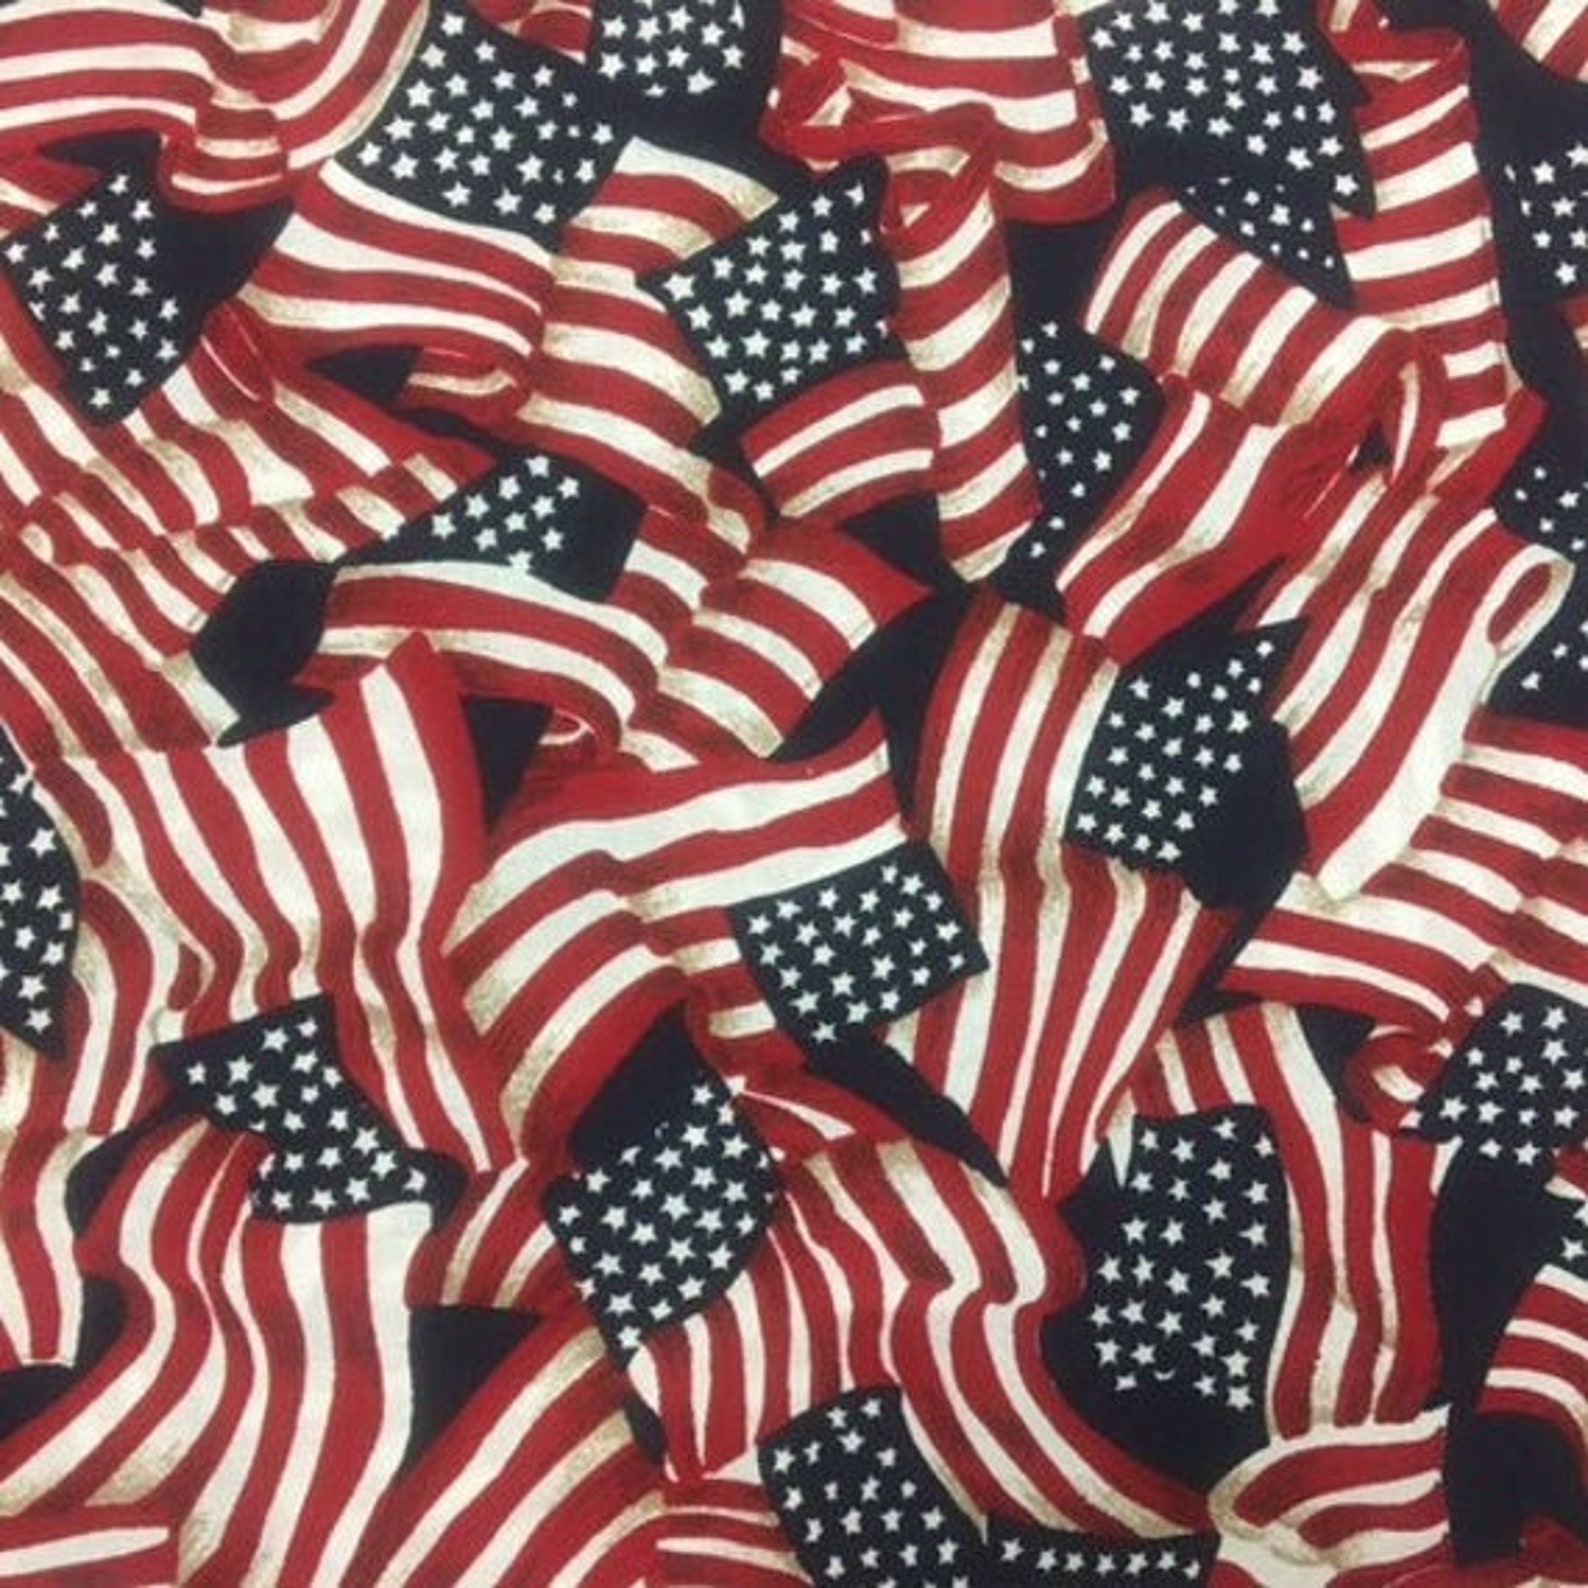 Flags Made in America 100% Woven Cotton Quilting Fabric 3 | Etsy